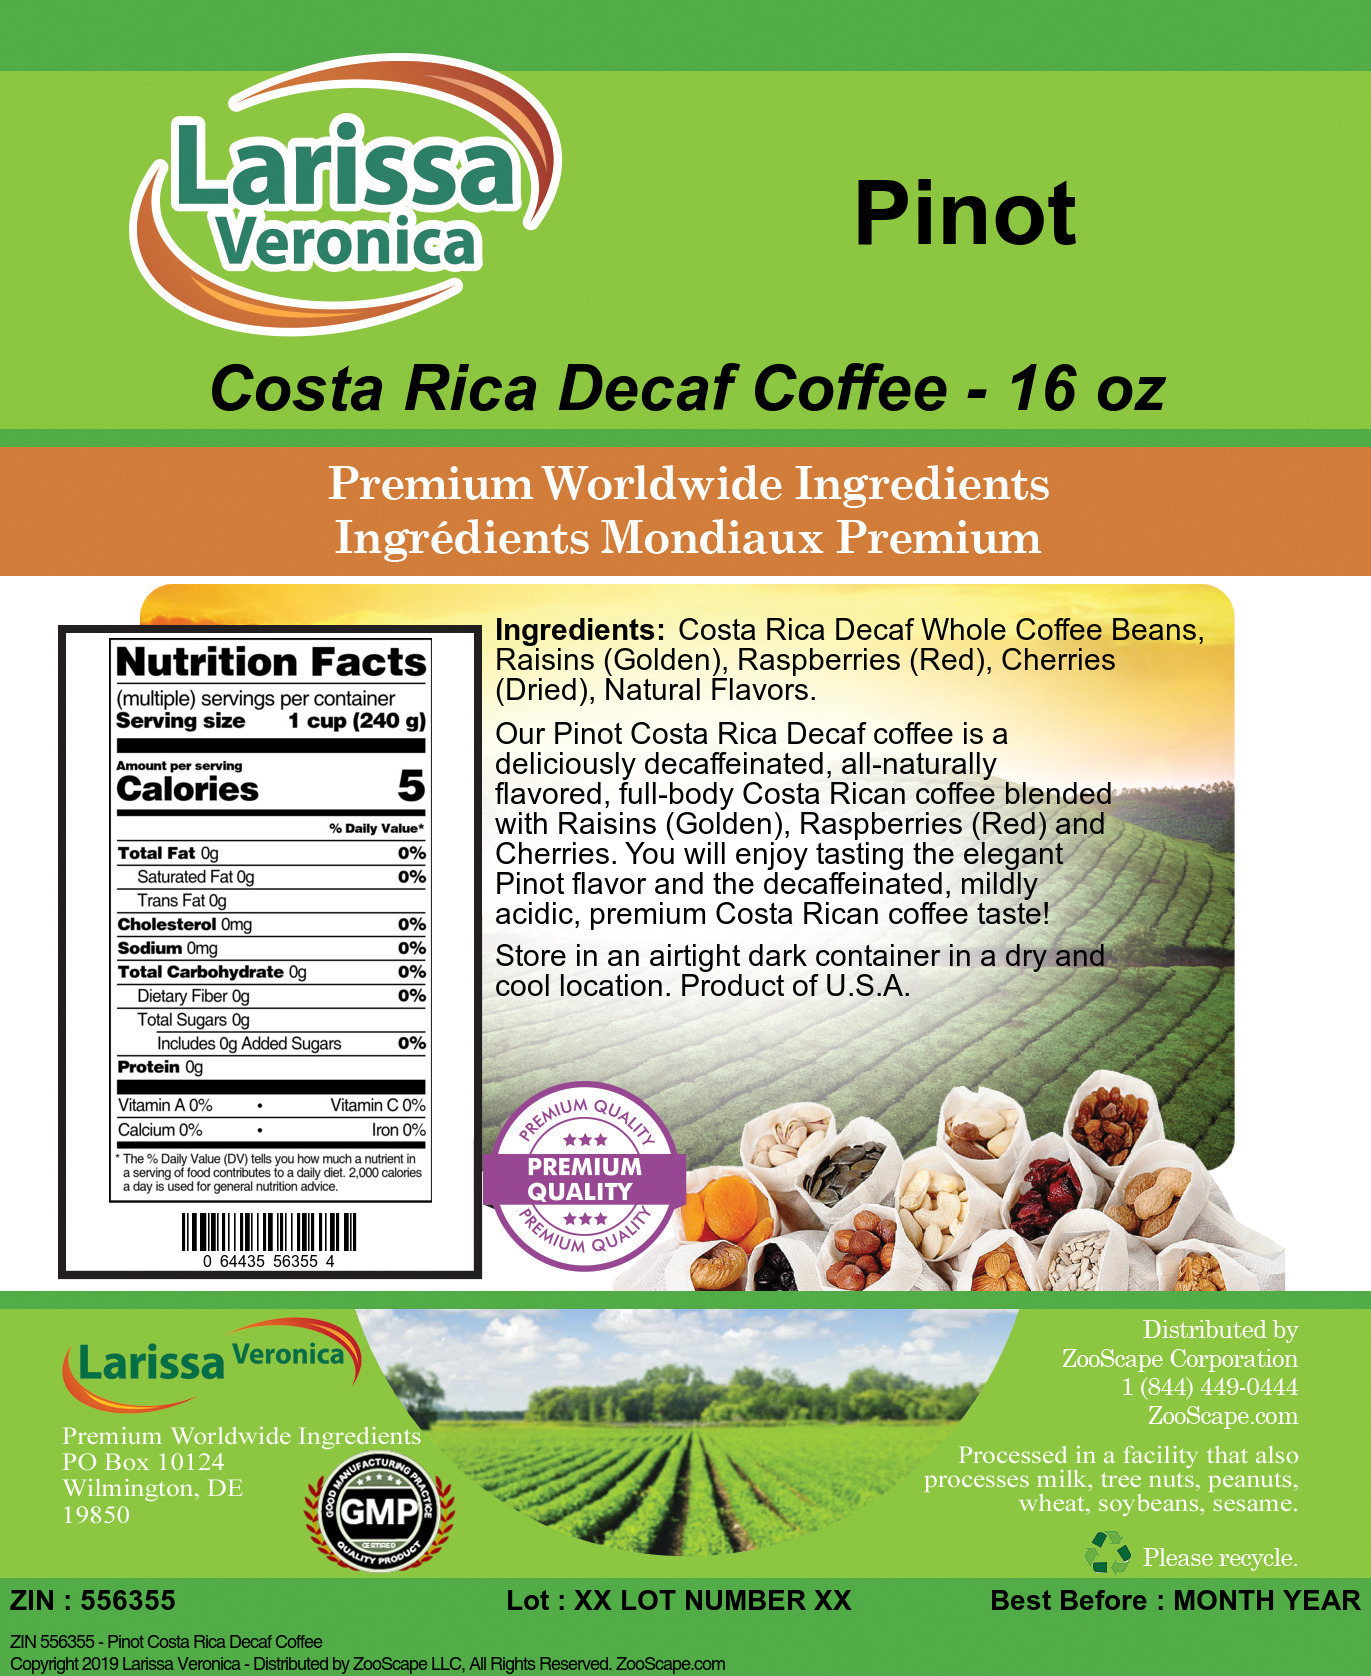 Pinot Costa Rica Decaf Coffee - Label